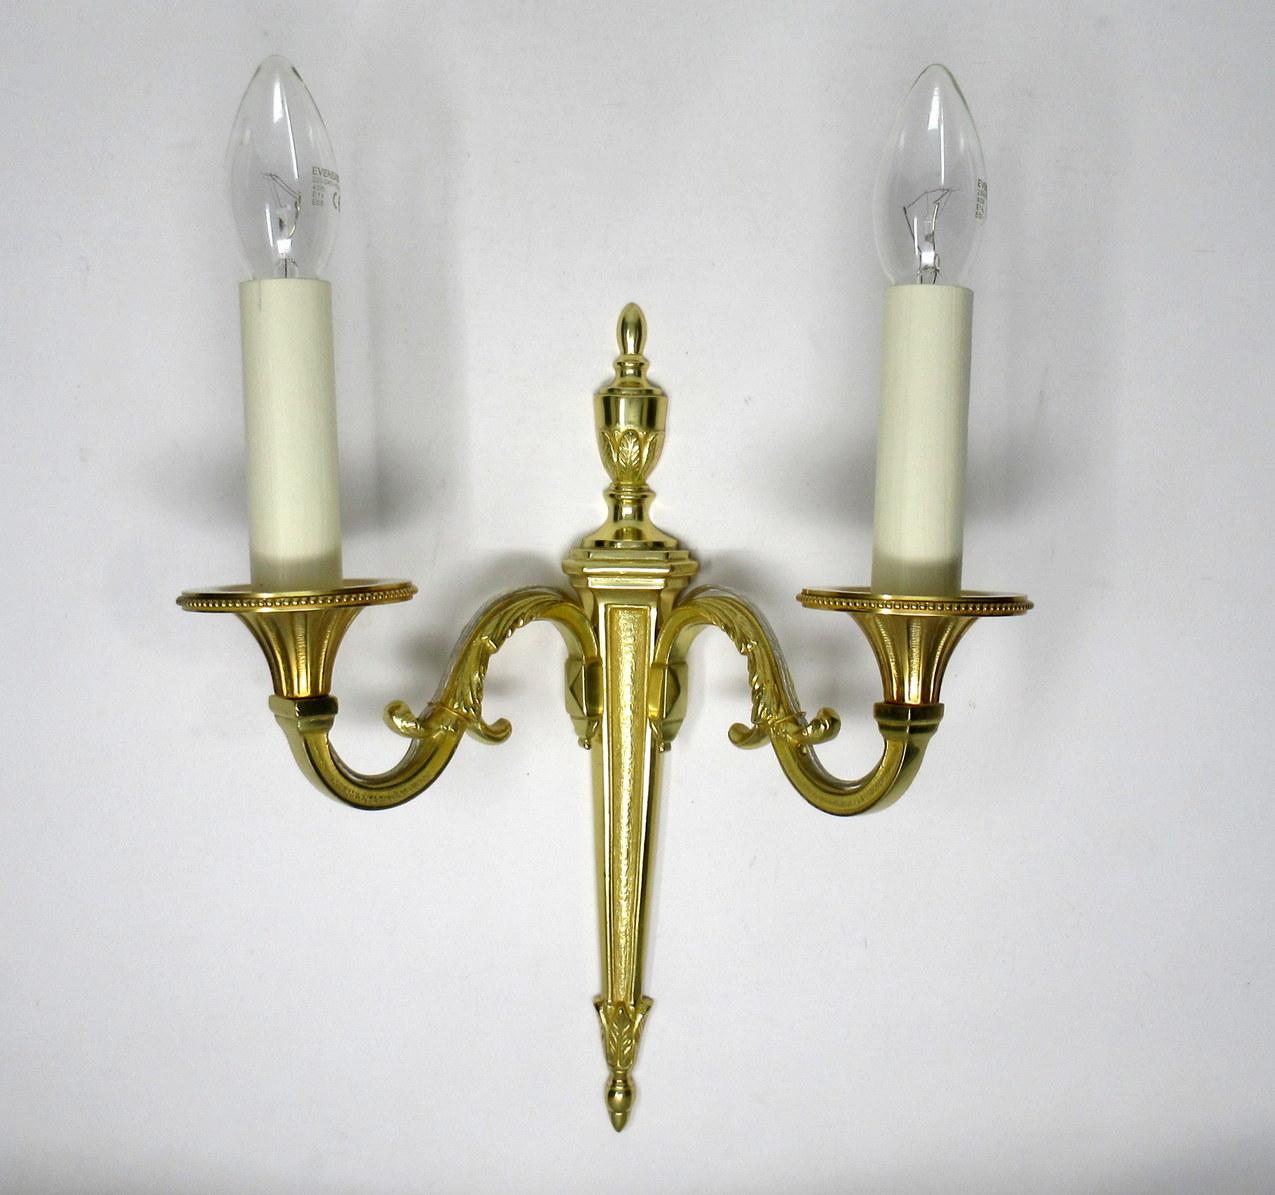 Fine quality pair of English gilt bronze twin arm wall candle sconces lights, of medium proportions, late 19th, early 20th century. 

The twin leaf capped scroll arms issuing from a well-cast single decorative tapering column backplate topped with